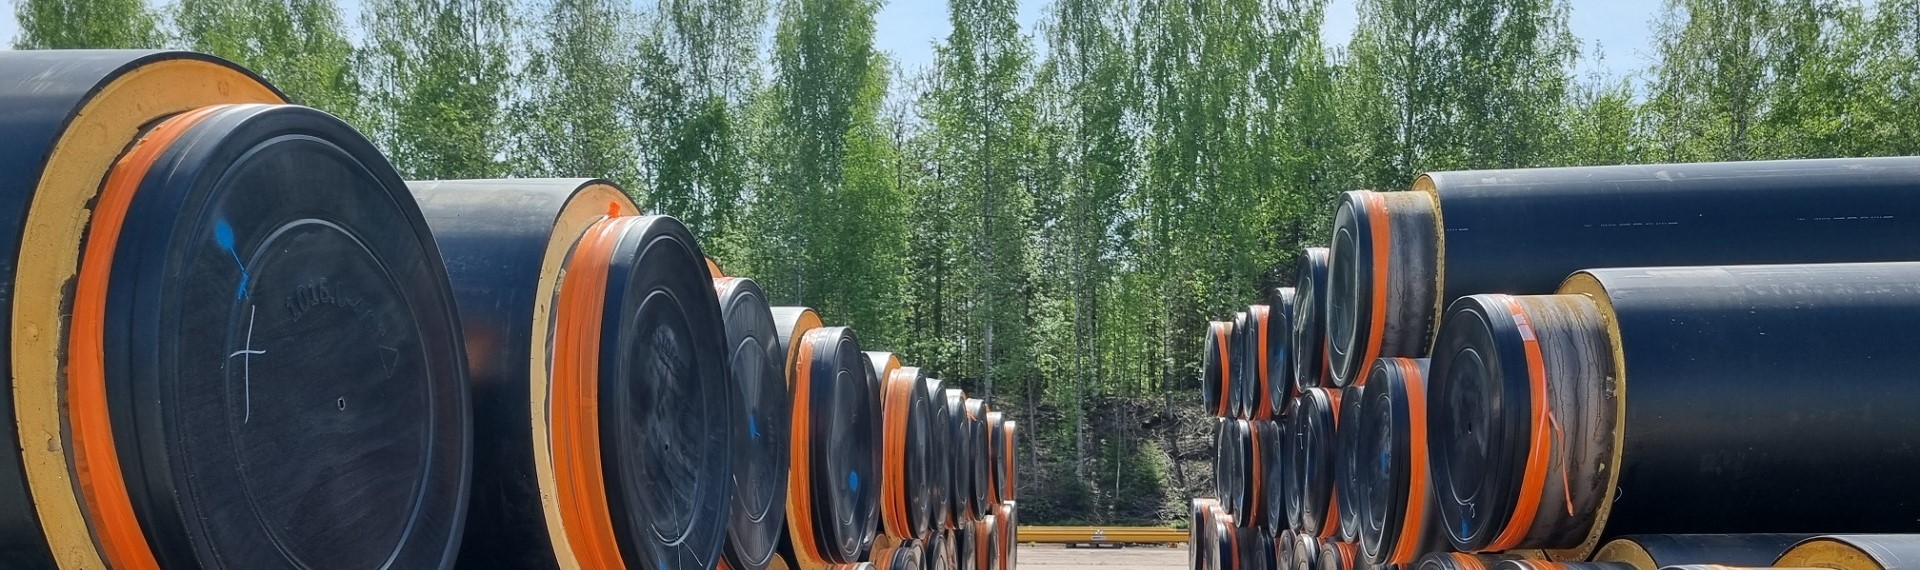 higher strength steel in district heating pipeline core tubes